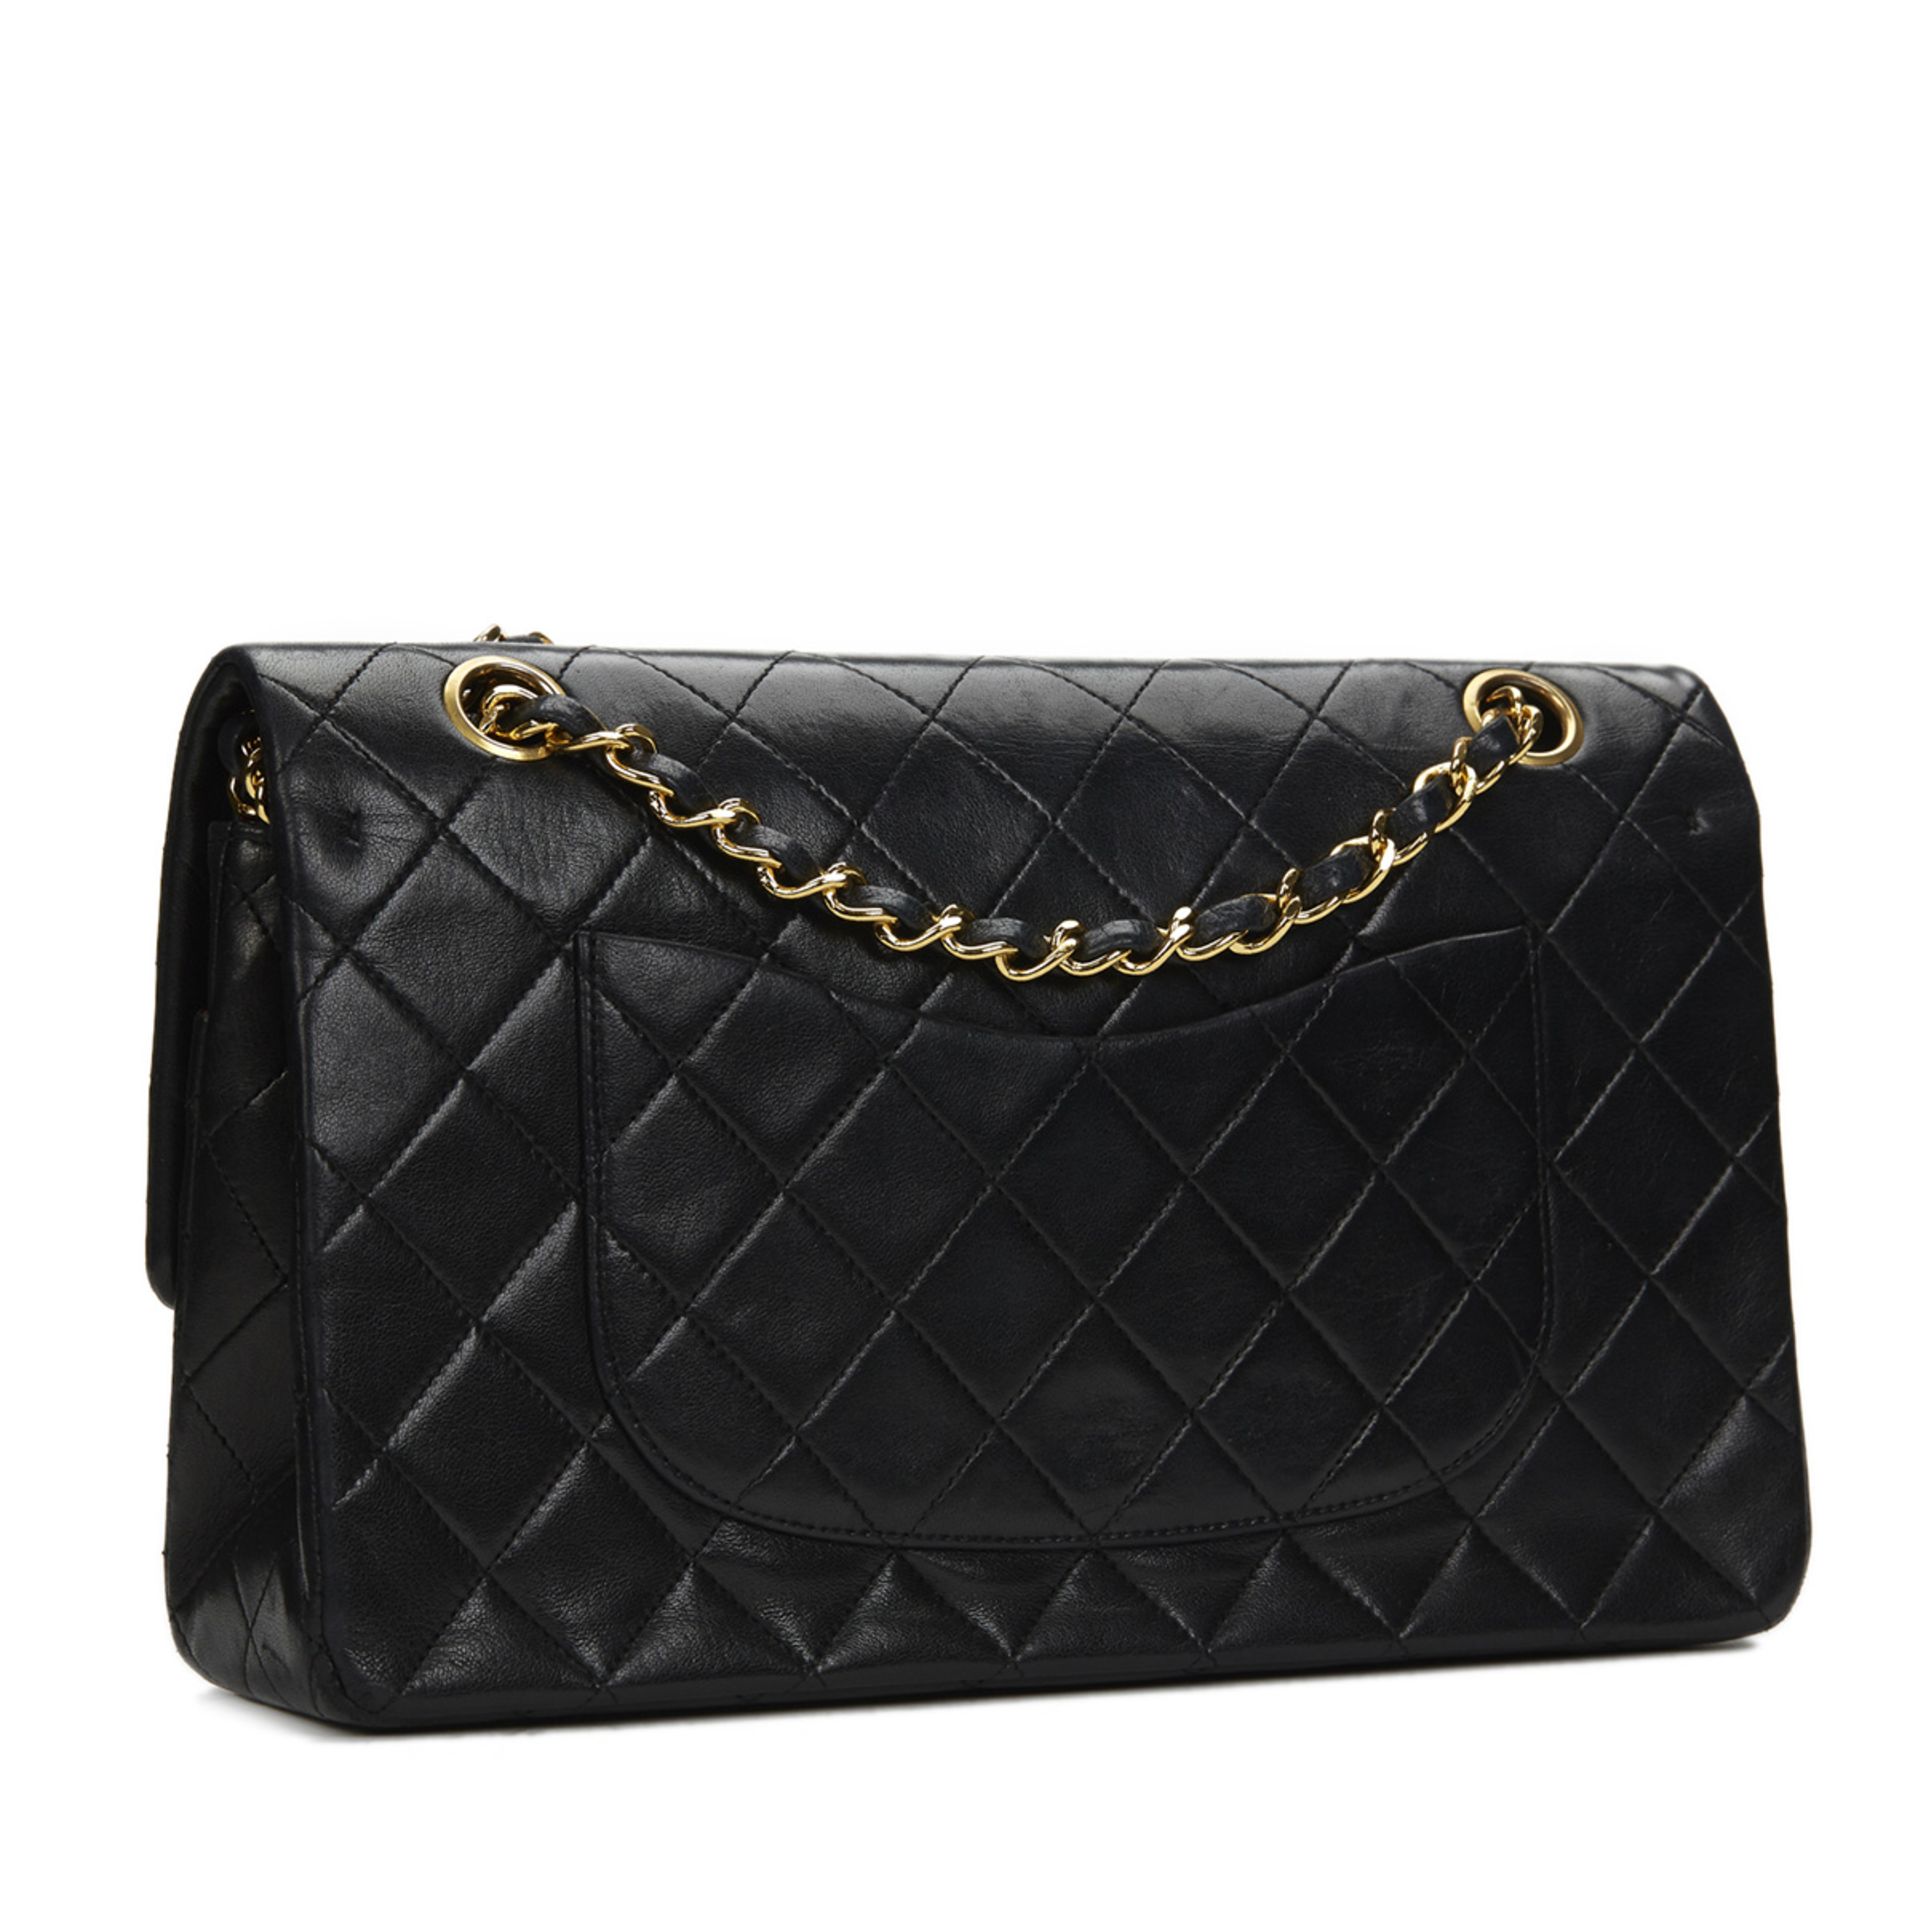 Black Quilted Lambskin Vintage Medium Classic Double Flap Bag - Image 3 of 9